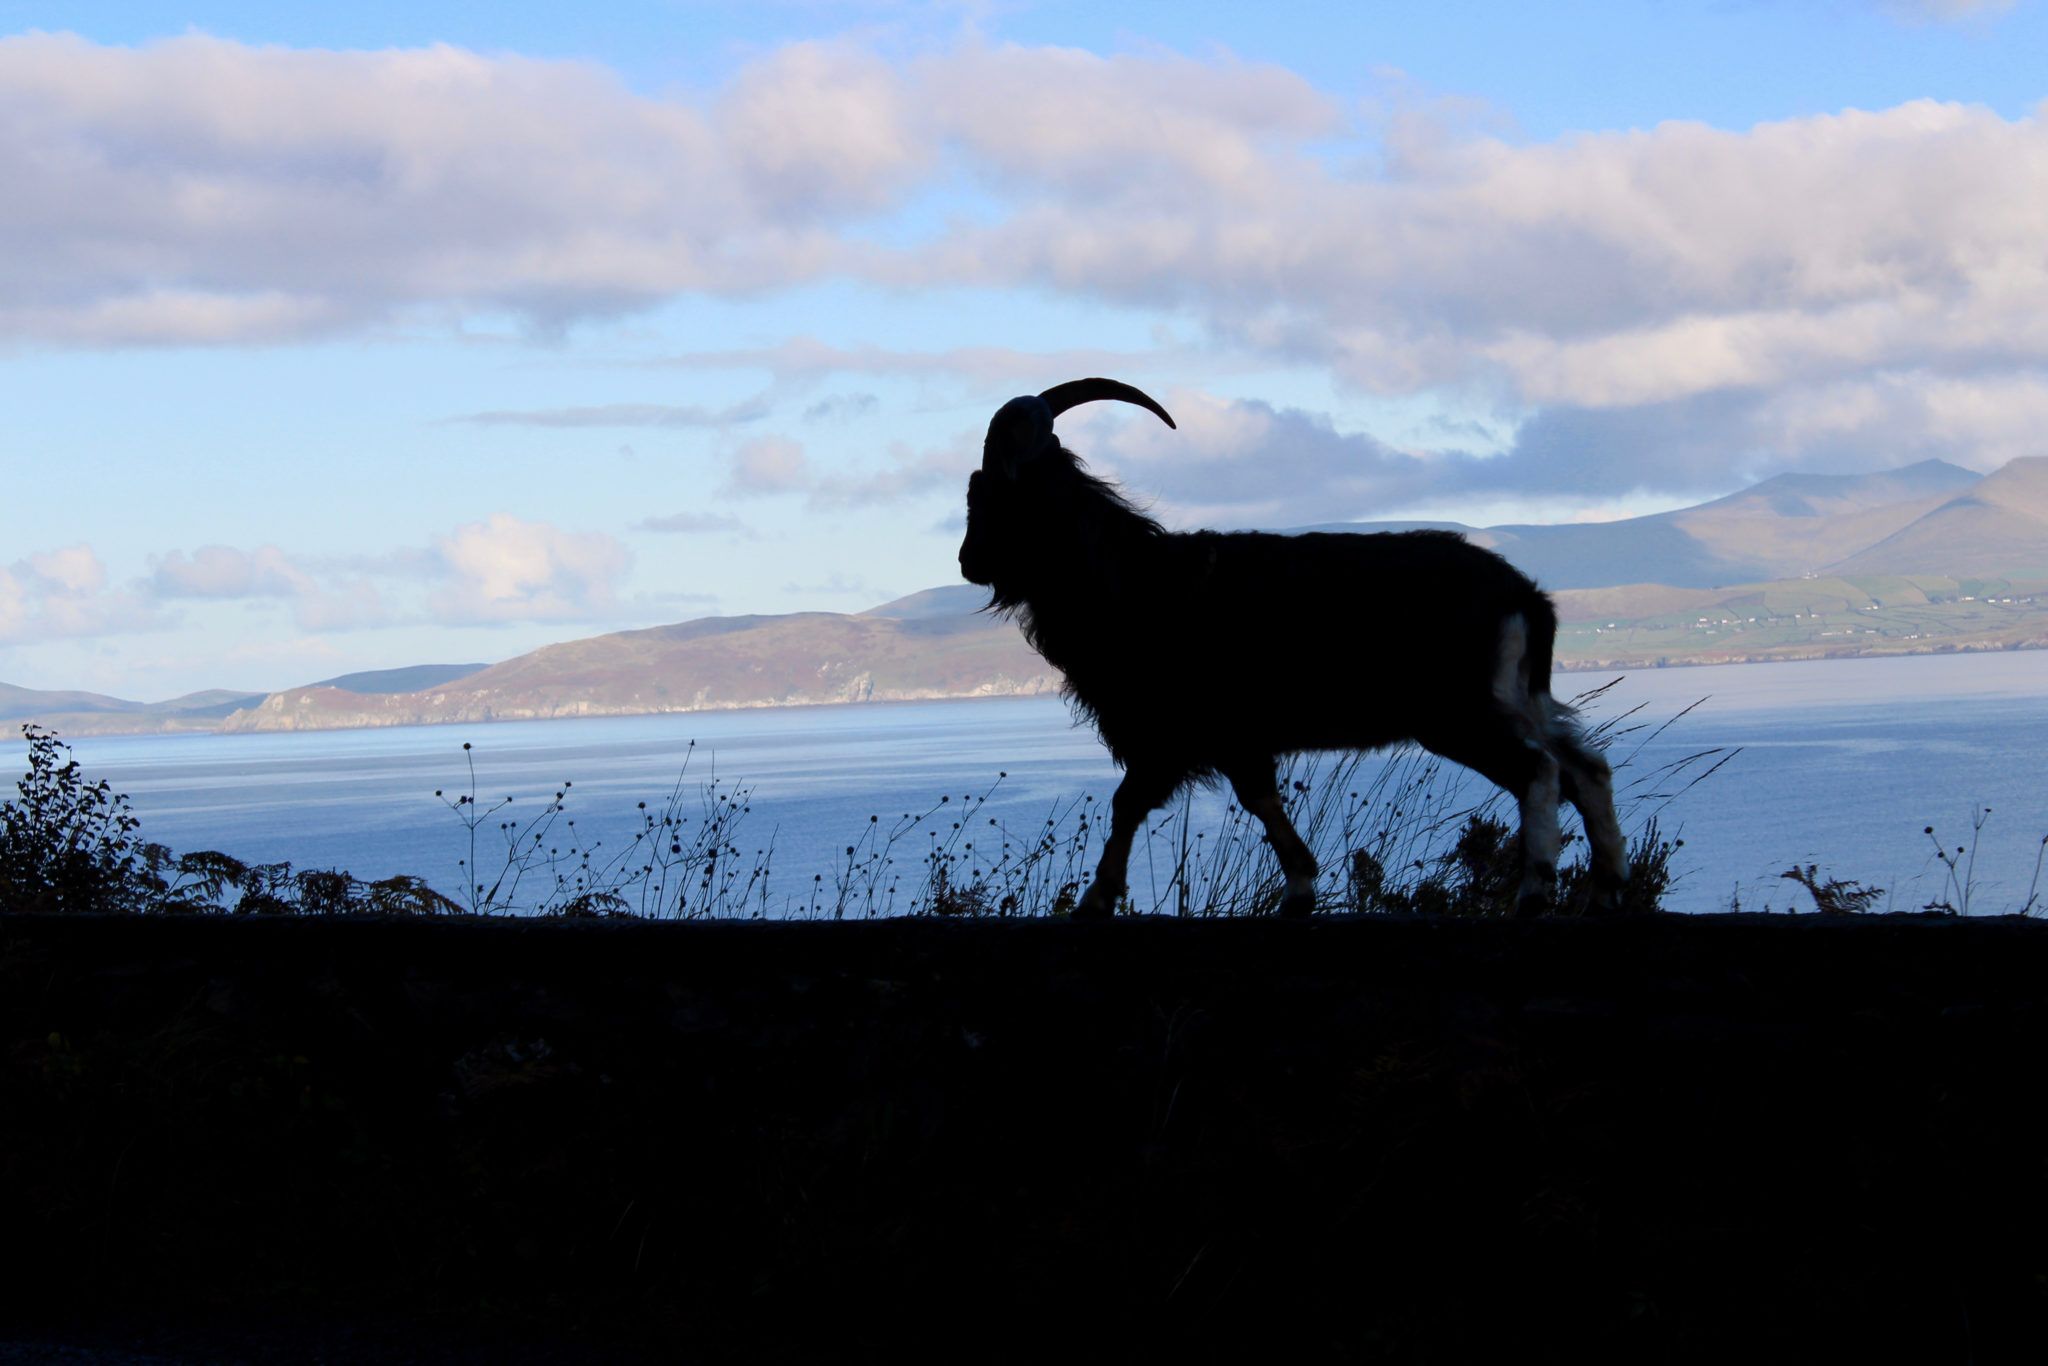 silhouette of mountain goat with blue skies, mountains and sea in the background